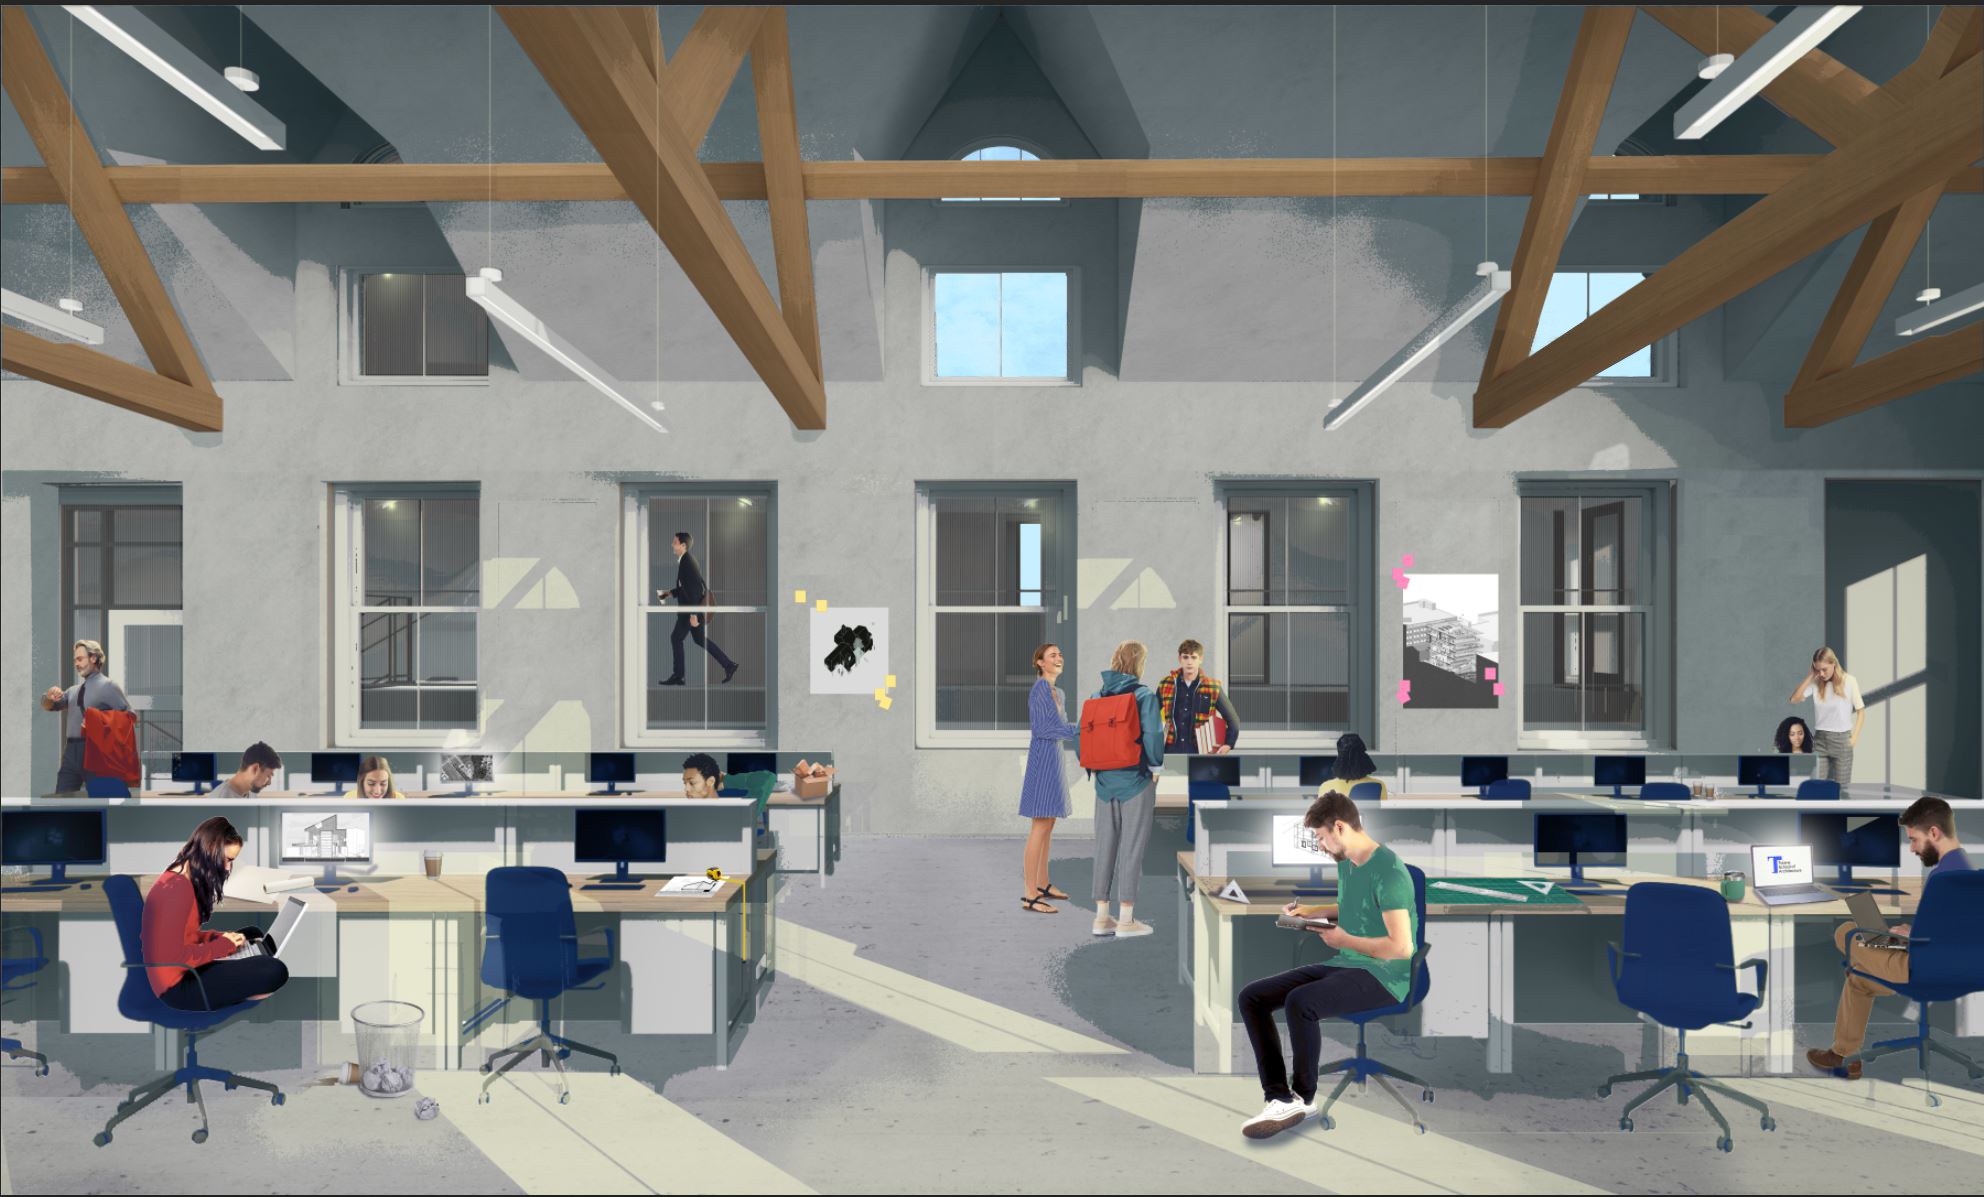 Interior perspective render of studio space with four rows of desk in the foreground, a row of windows in the background, and exposed rafters above in a pitched roof ceiling